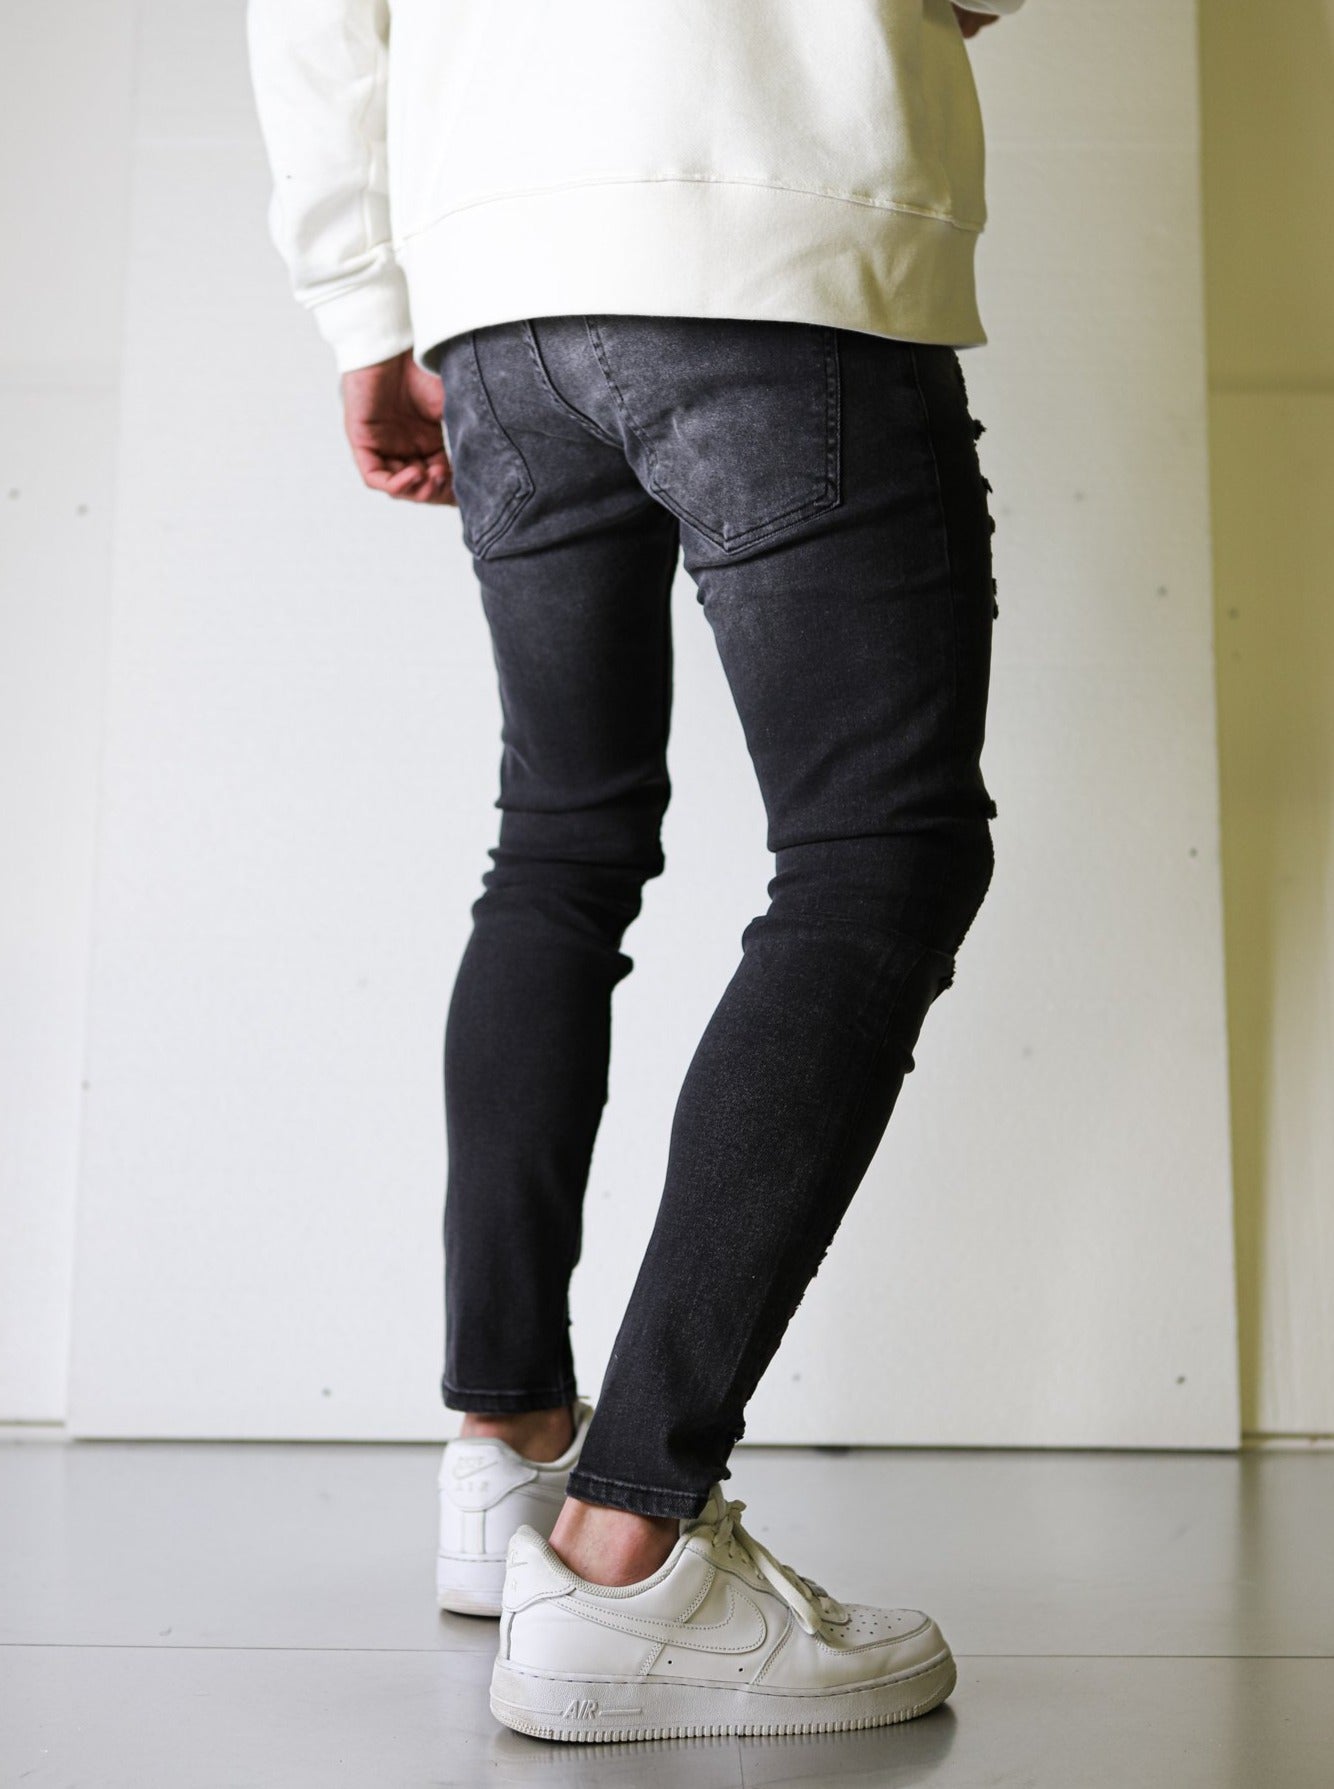 Black Fade Ripped Skinny Jeans - UNEFFECTED STUDIOS® - JEANS - UNEFFECTED